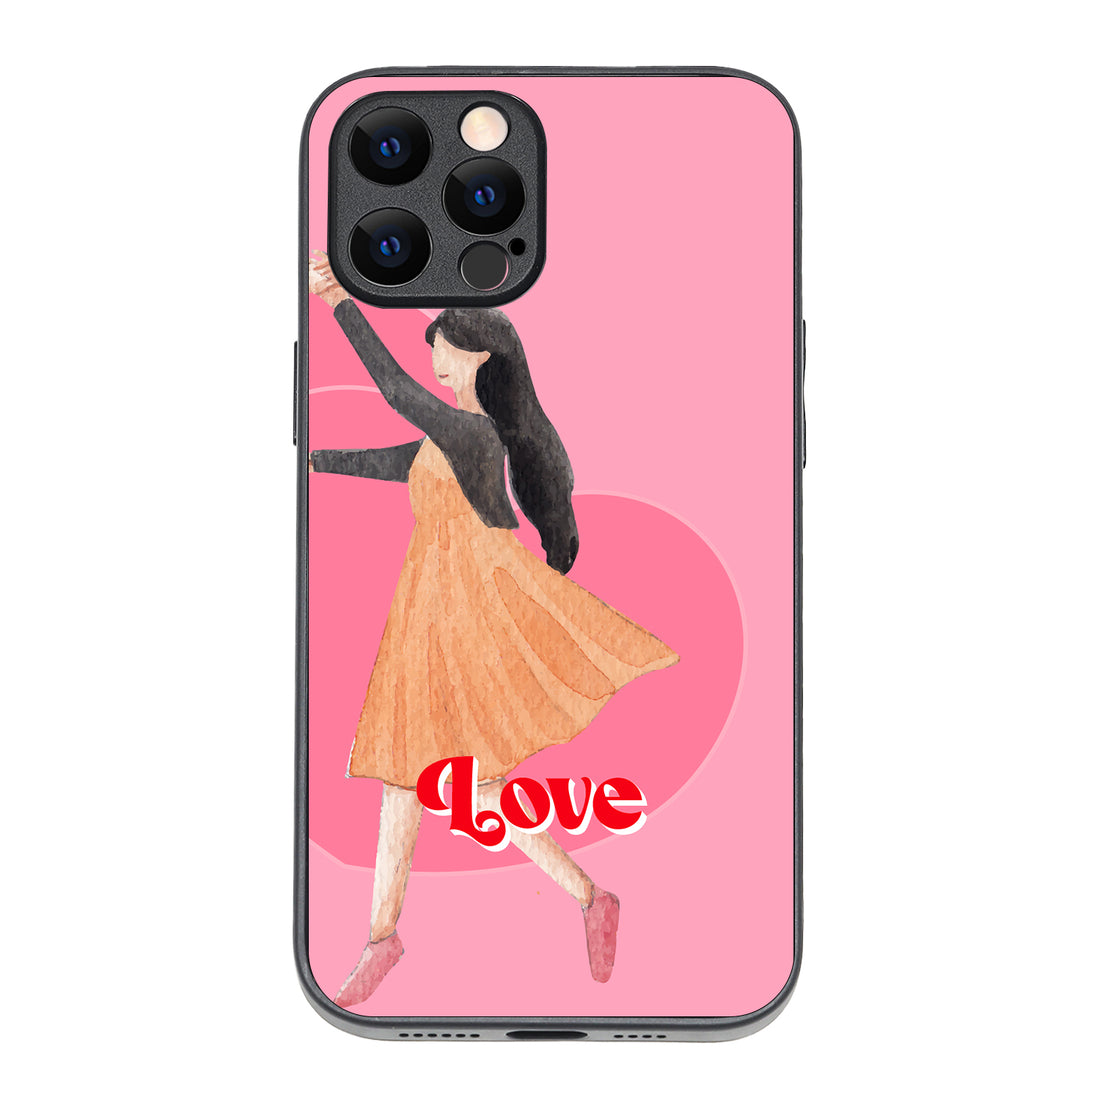 Forever Love Girl Couple iPhone 12 Pro Max Case